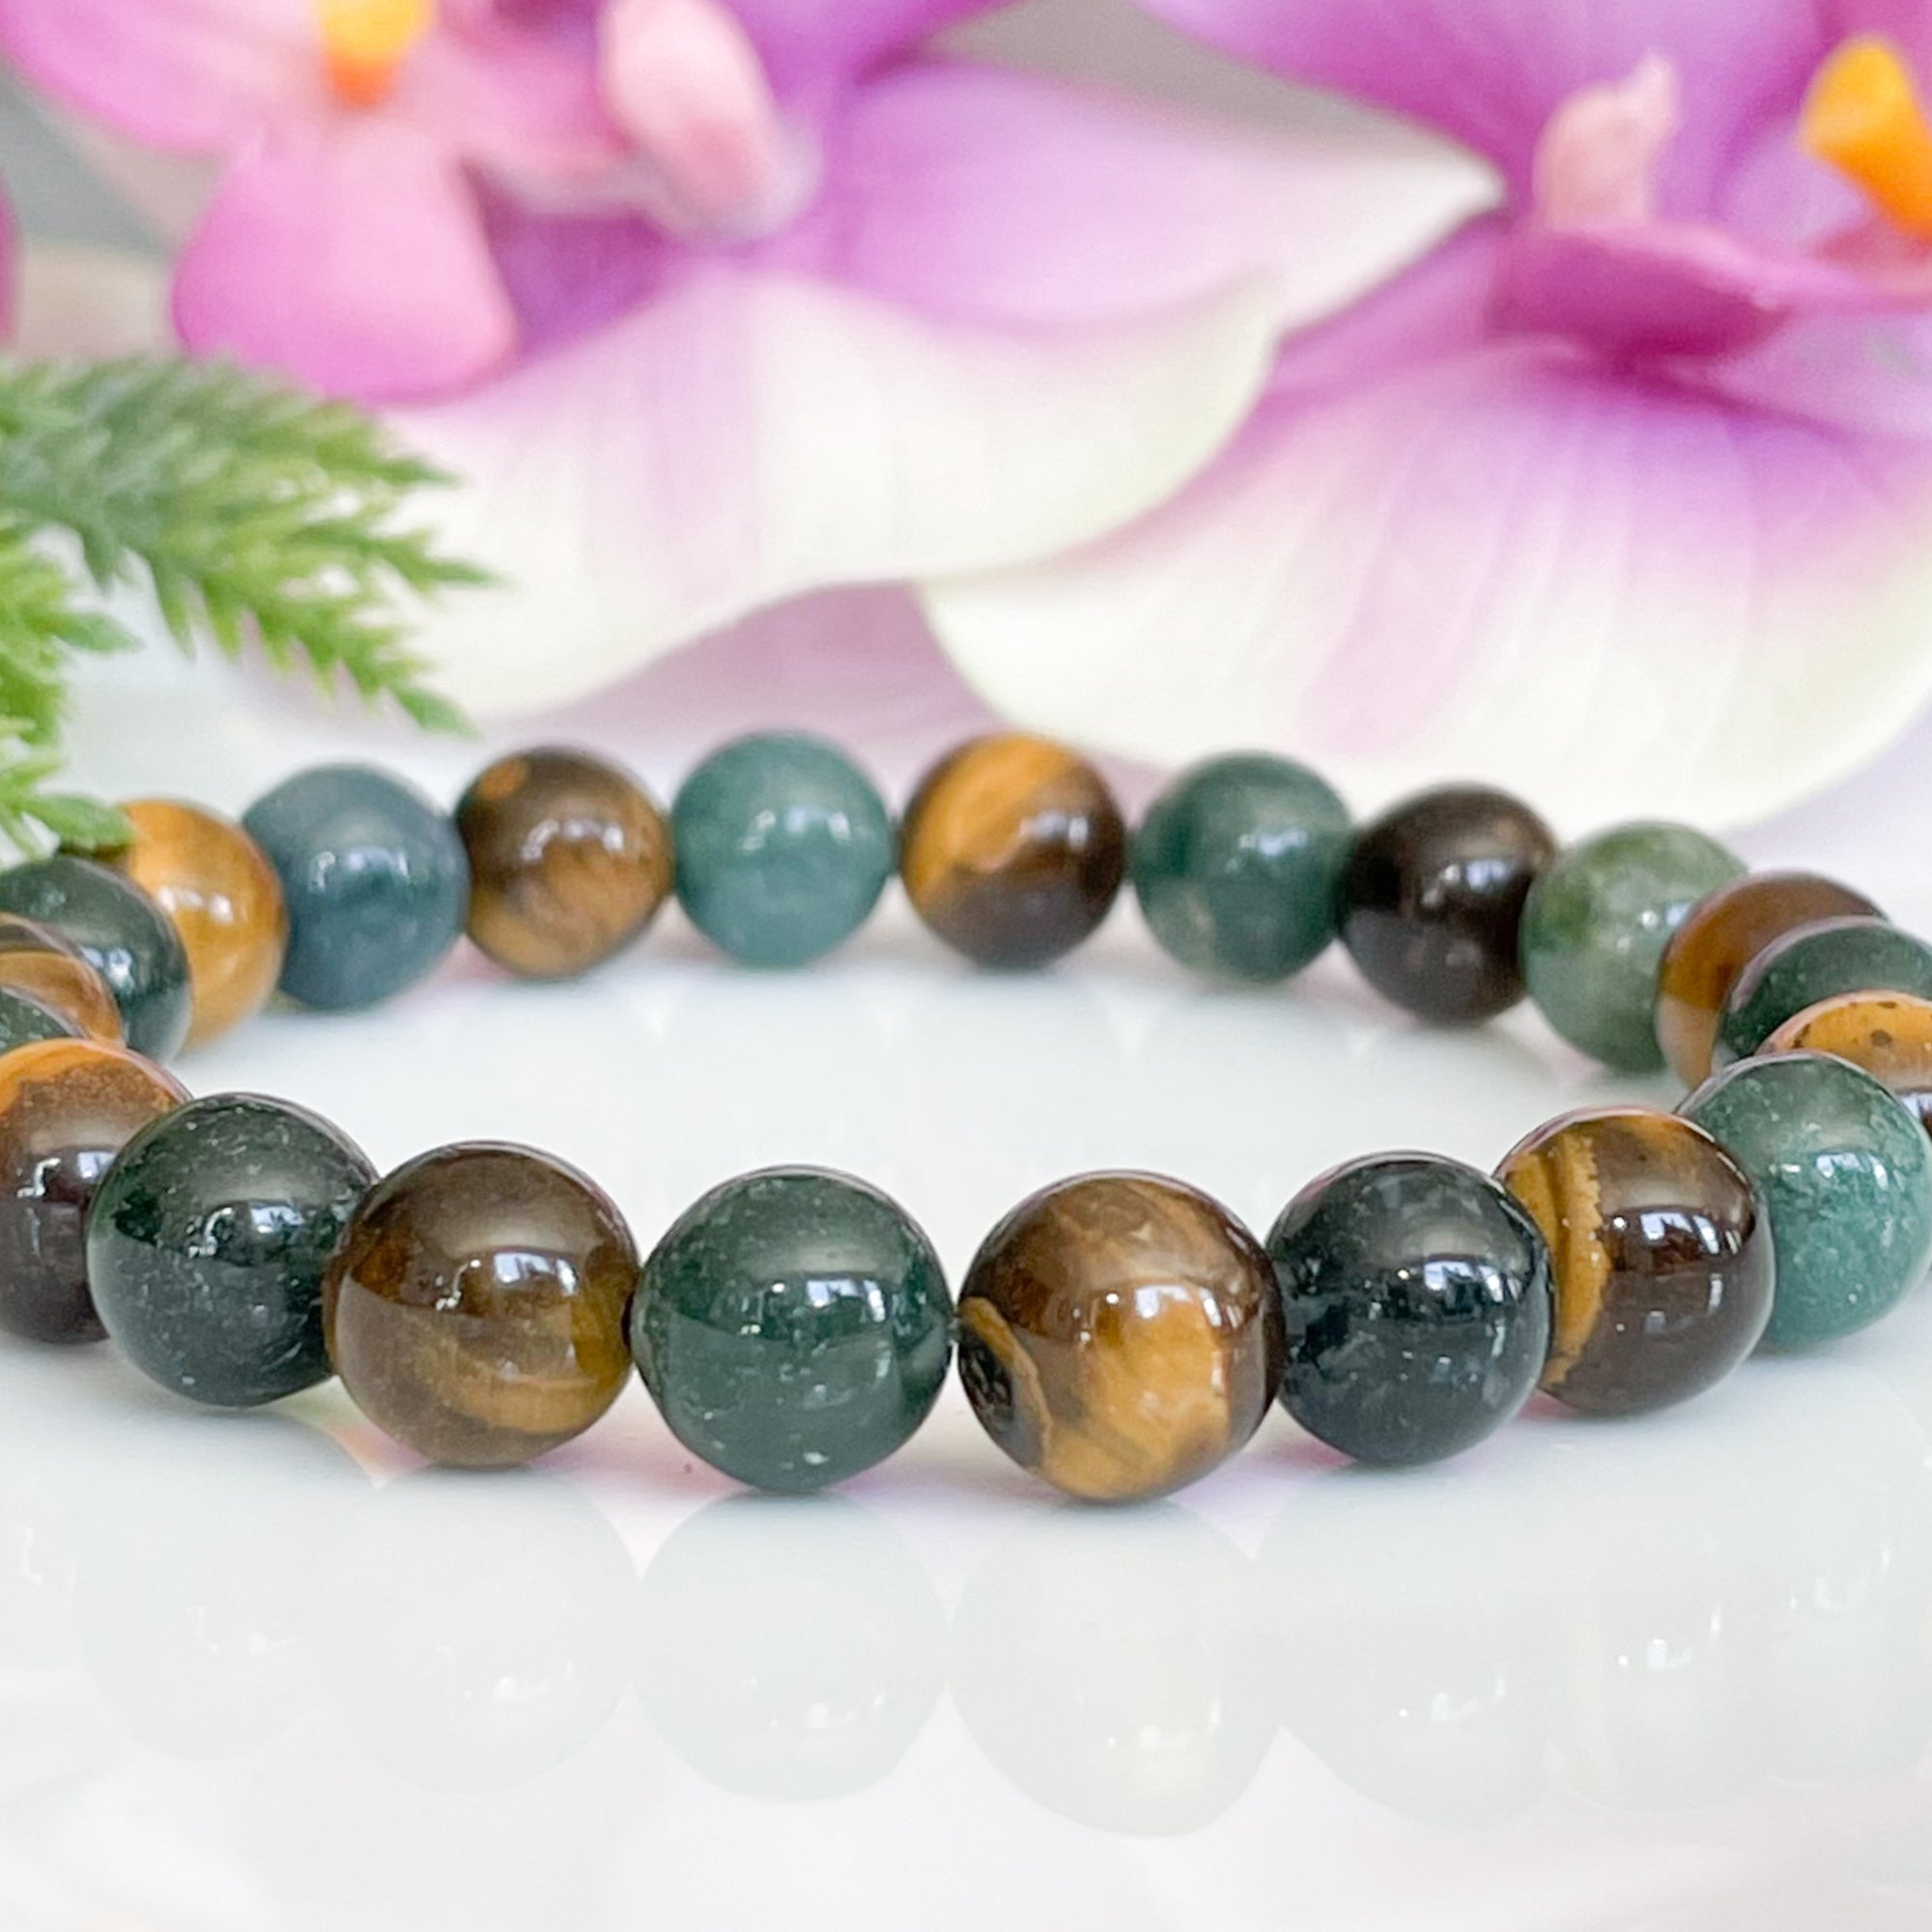 Green Moss Agate and Tigers Eye Healing Crystal Bracelet